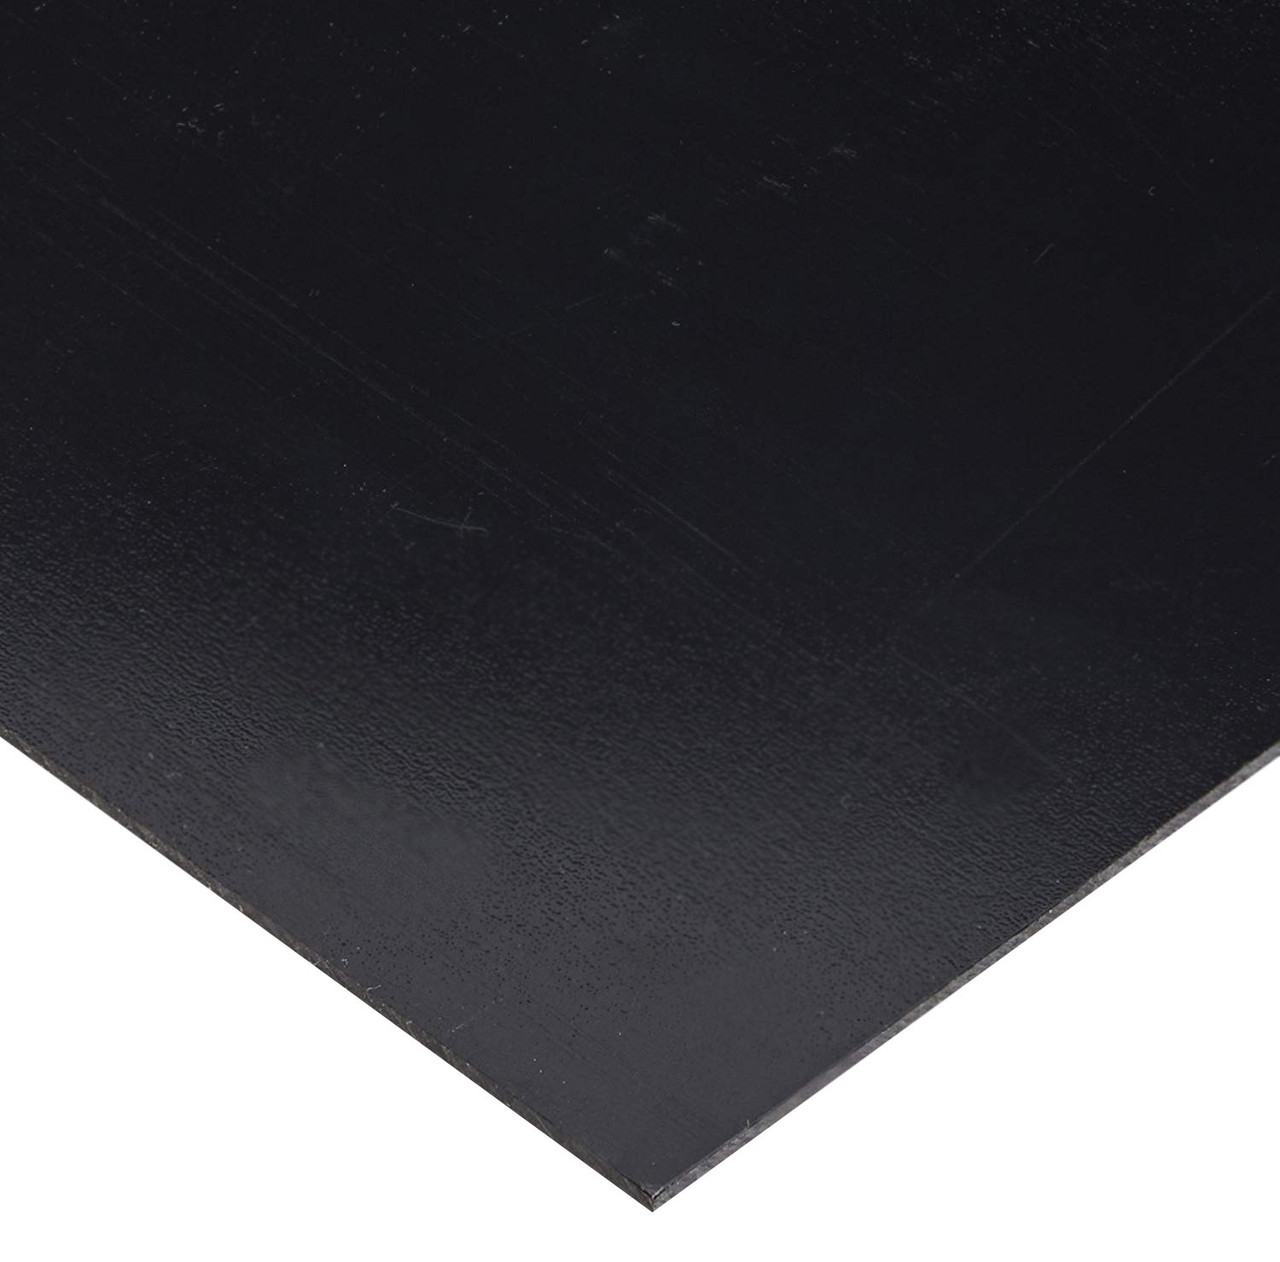 0.125" x 24" x 48" (3 Pack), Kydex, Royalite Fire Rated Plastic Sheet, PC Level Haircell, Black